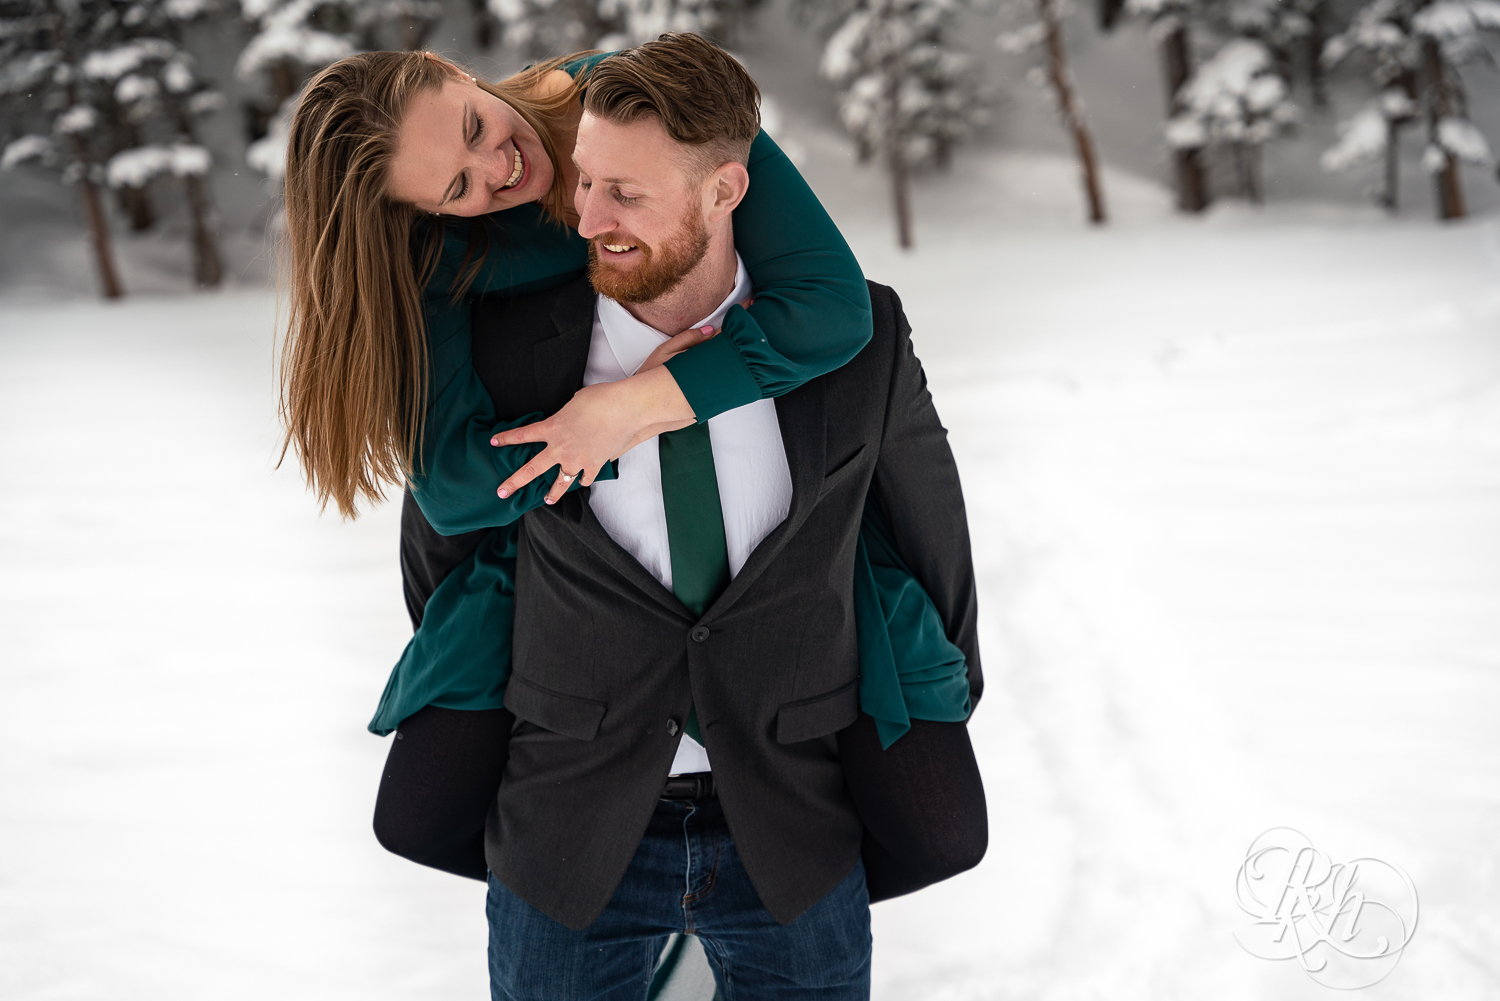 Man in suit and woman in green dress do piggy back ride in snow on Dream Lake in Rocky Mountain National Park, Colorado.